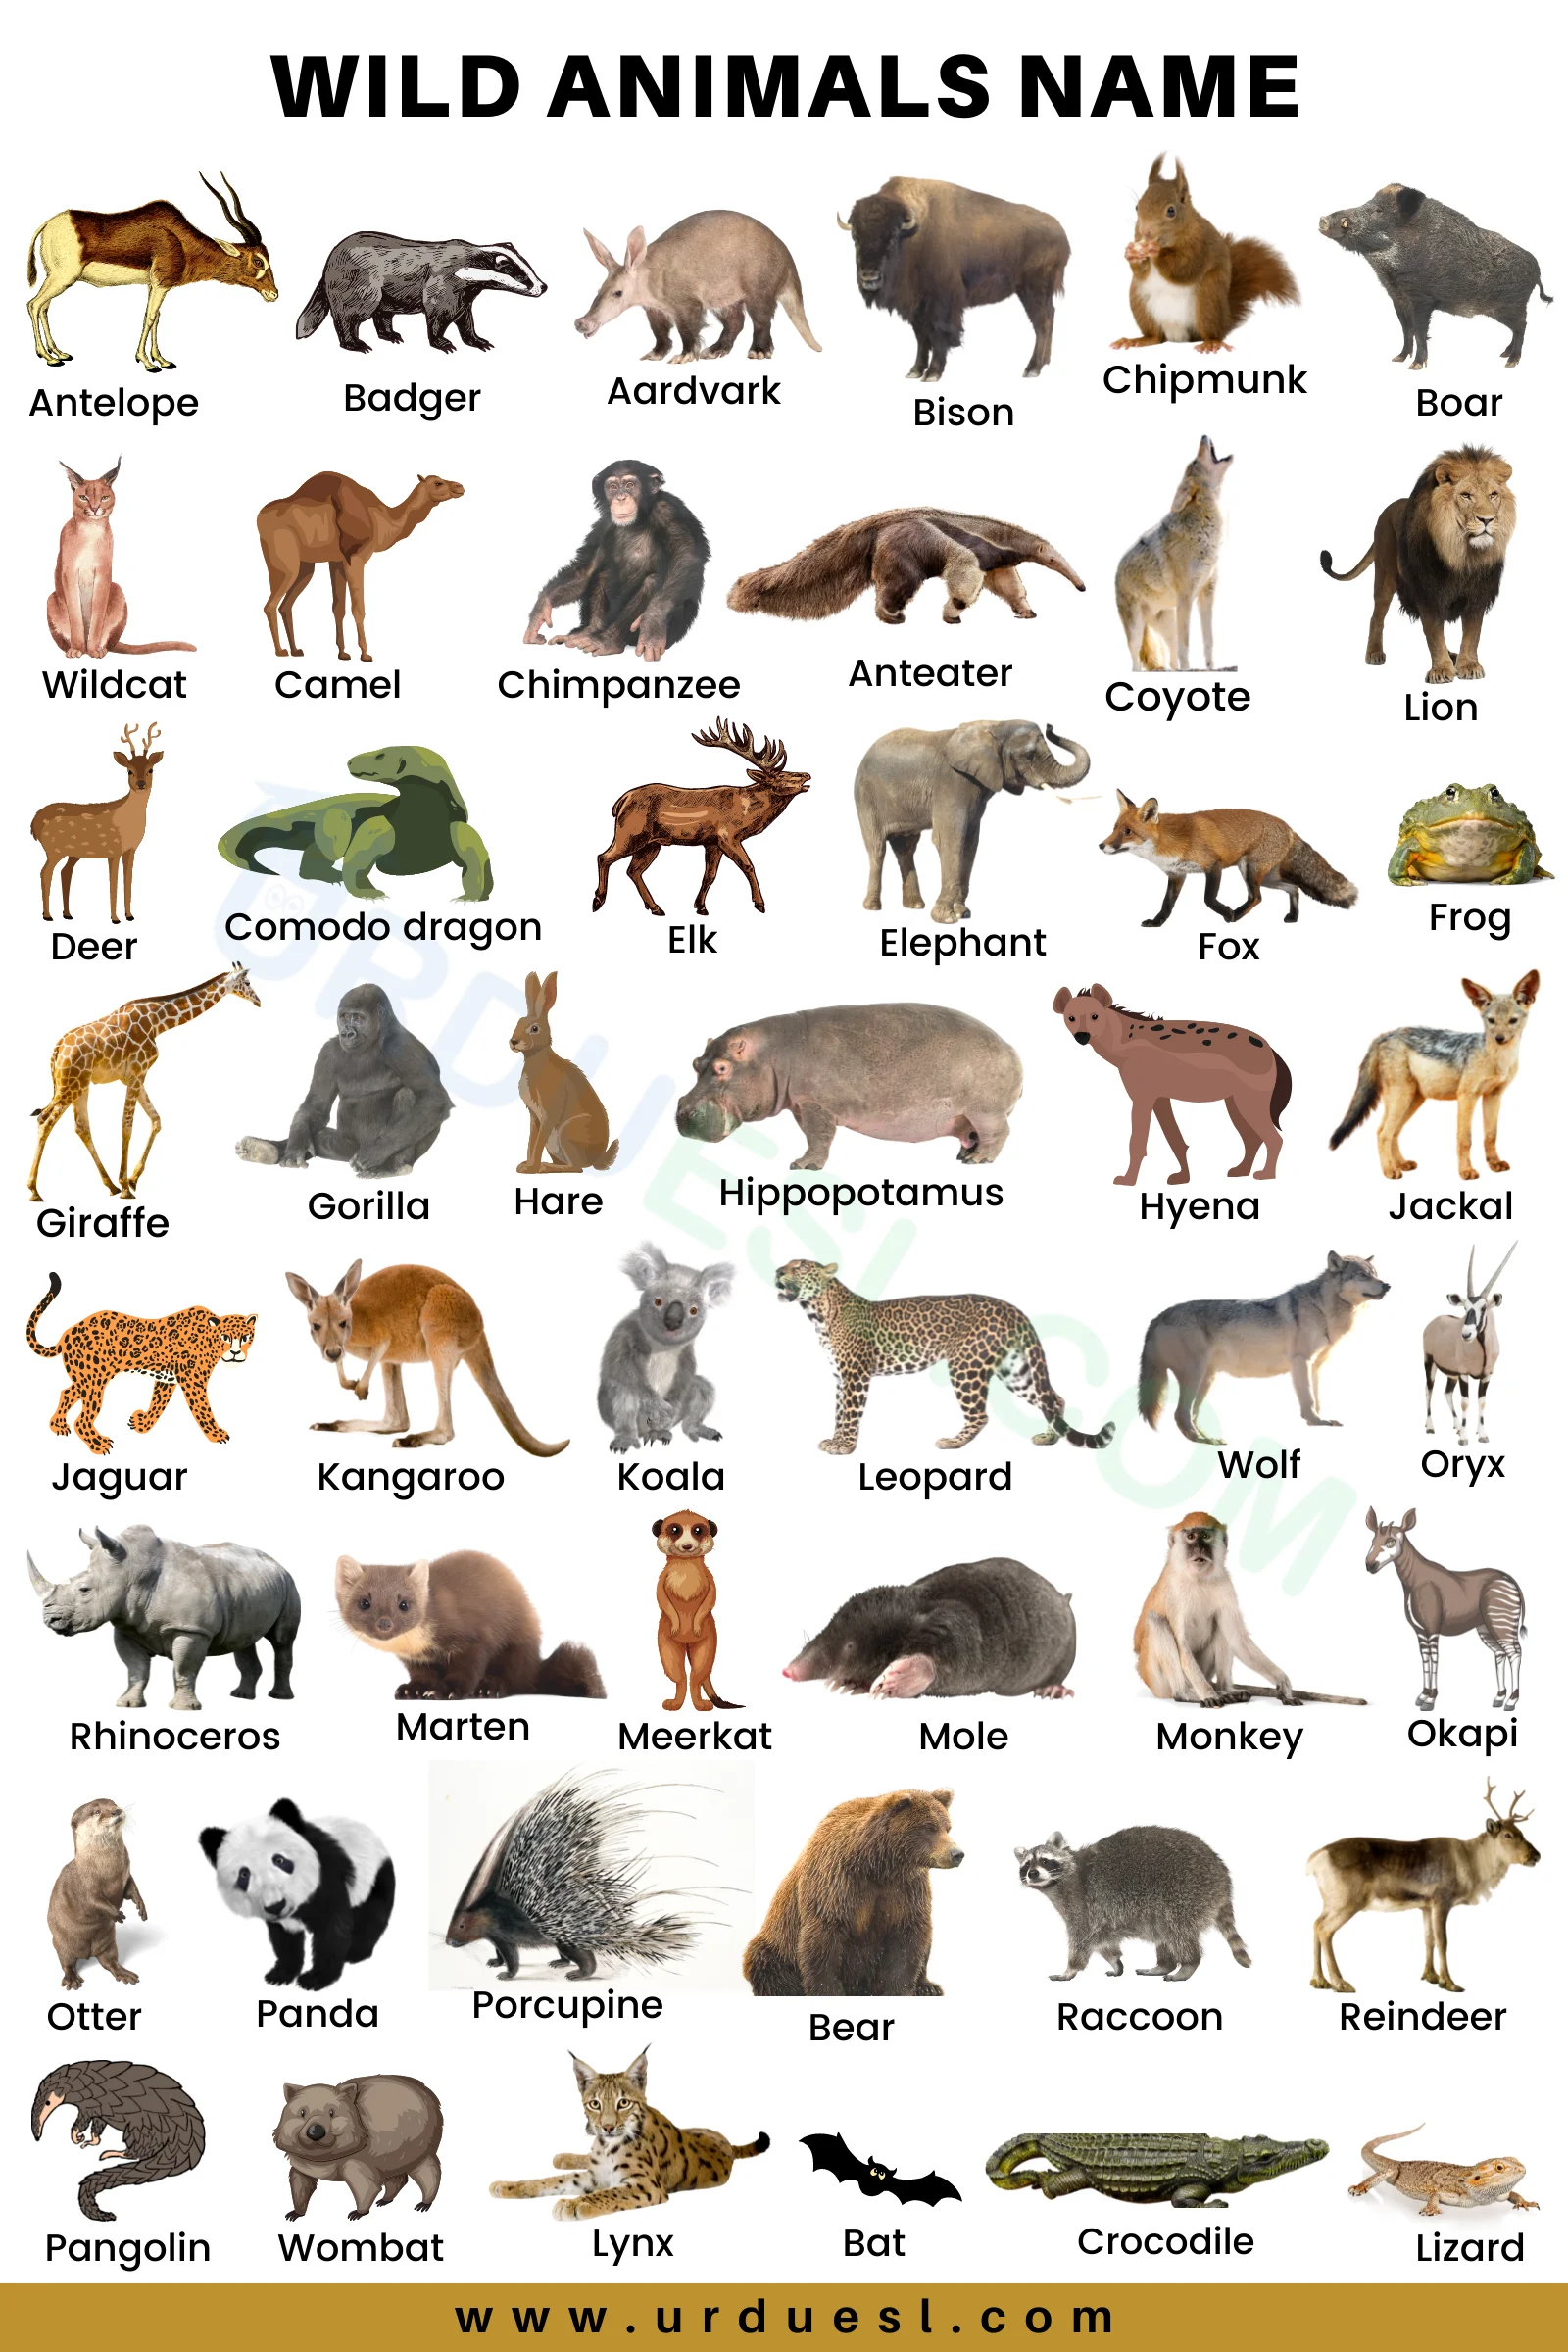 75+ Wild Animals Names In English With Pictures and Download Pdf